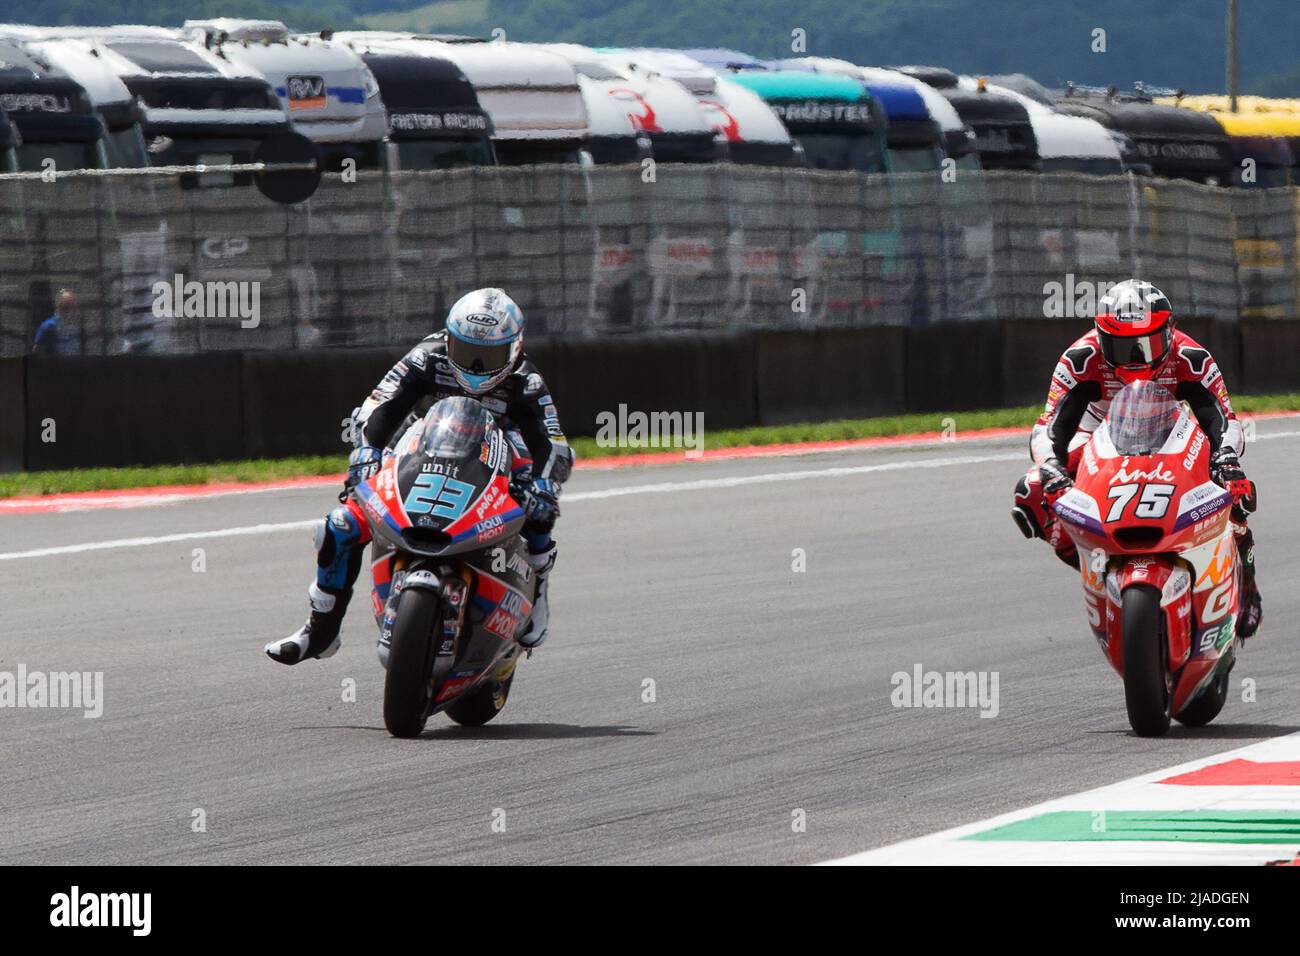 Mugello, Italy. 29th May, 2022. 23 Marcel Schrotter and 75 Albert Arenas during Gran Premio dâ&#x80;&#x99;Italia Oakley Race Moto2, Moto3, MotoGP World Championship in Mugello, Italy, May 29 2022 Credit: Independent Photo Agency/Alamy Live News Stock Photo